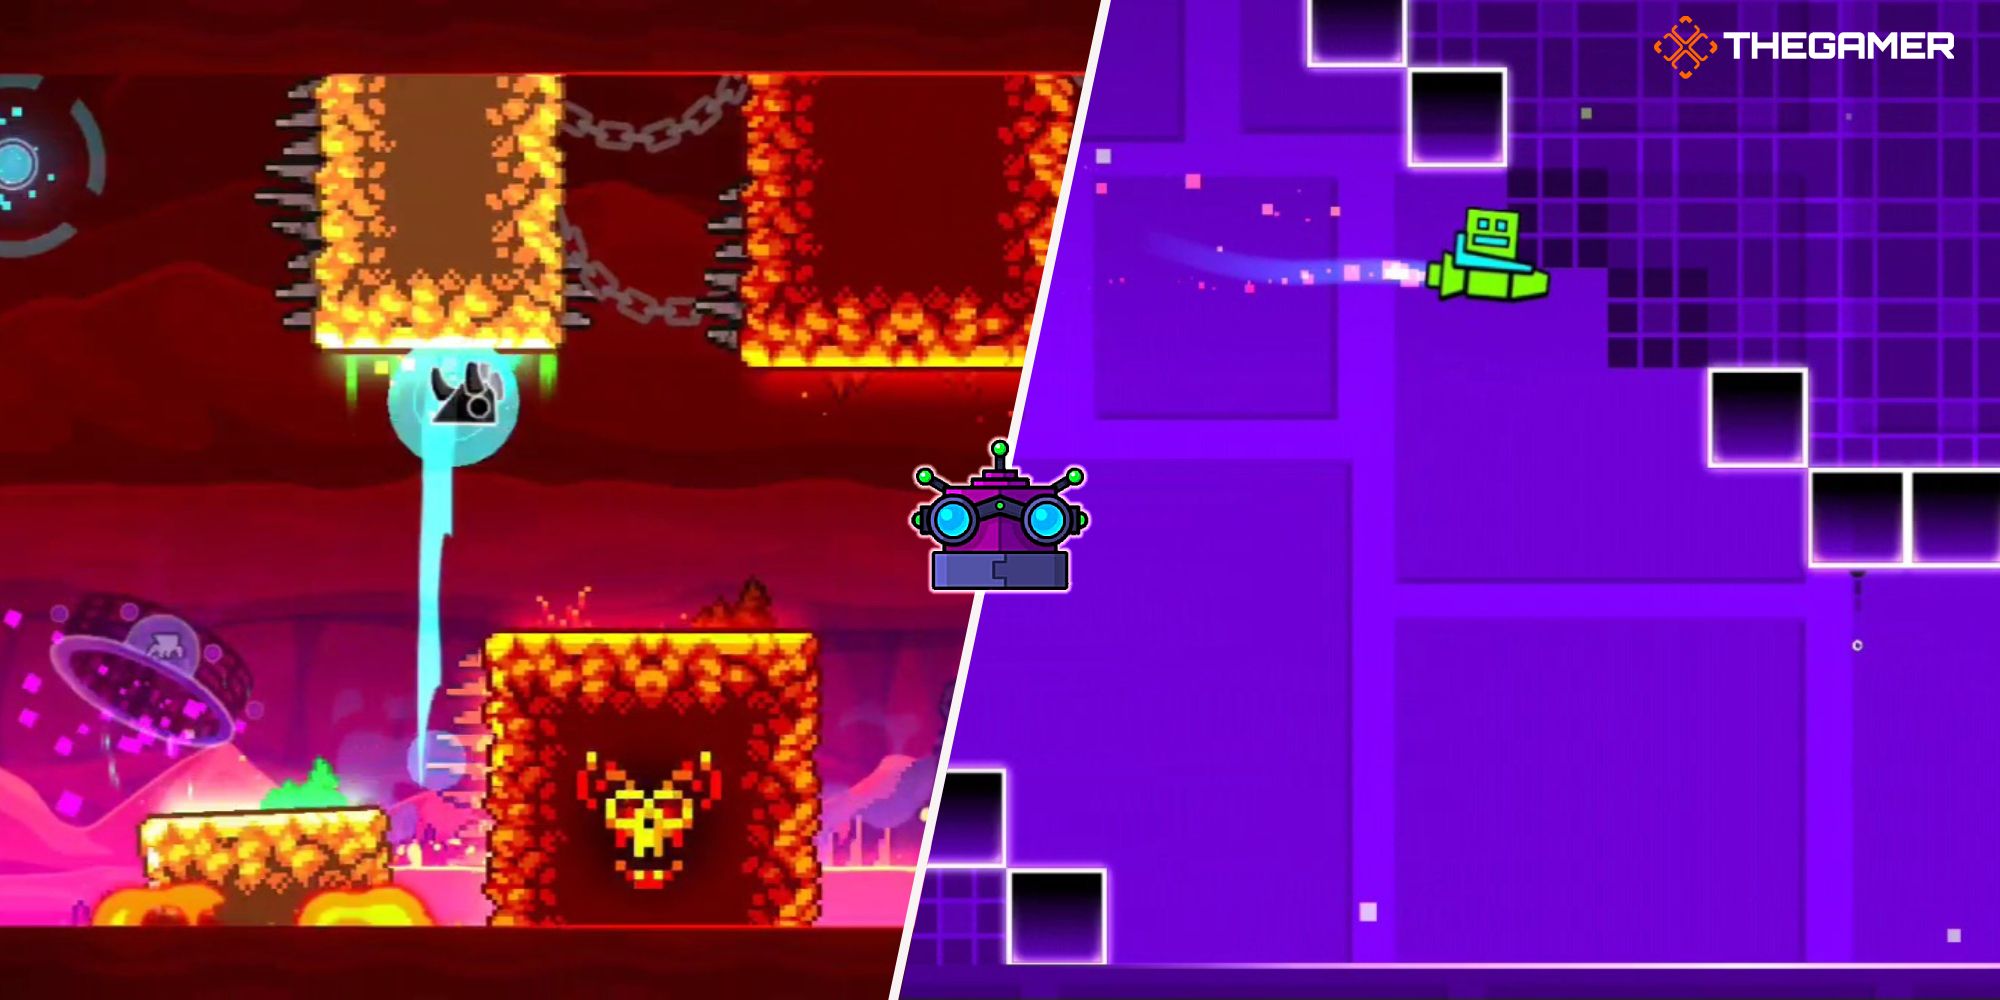 Main Levels in Geometry Dash, and the mechanic in the center.